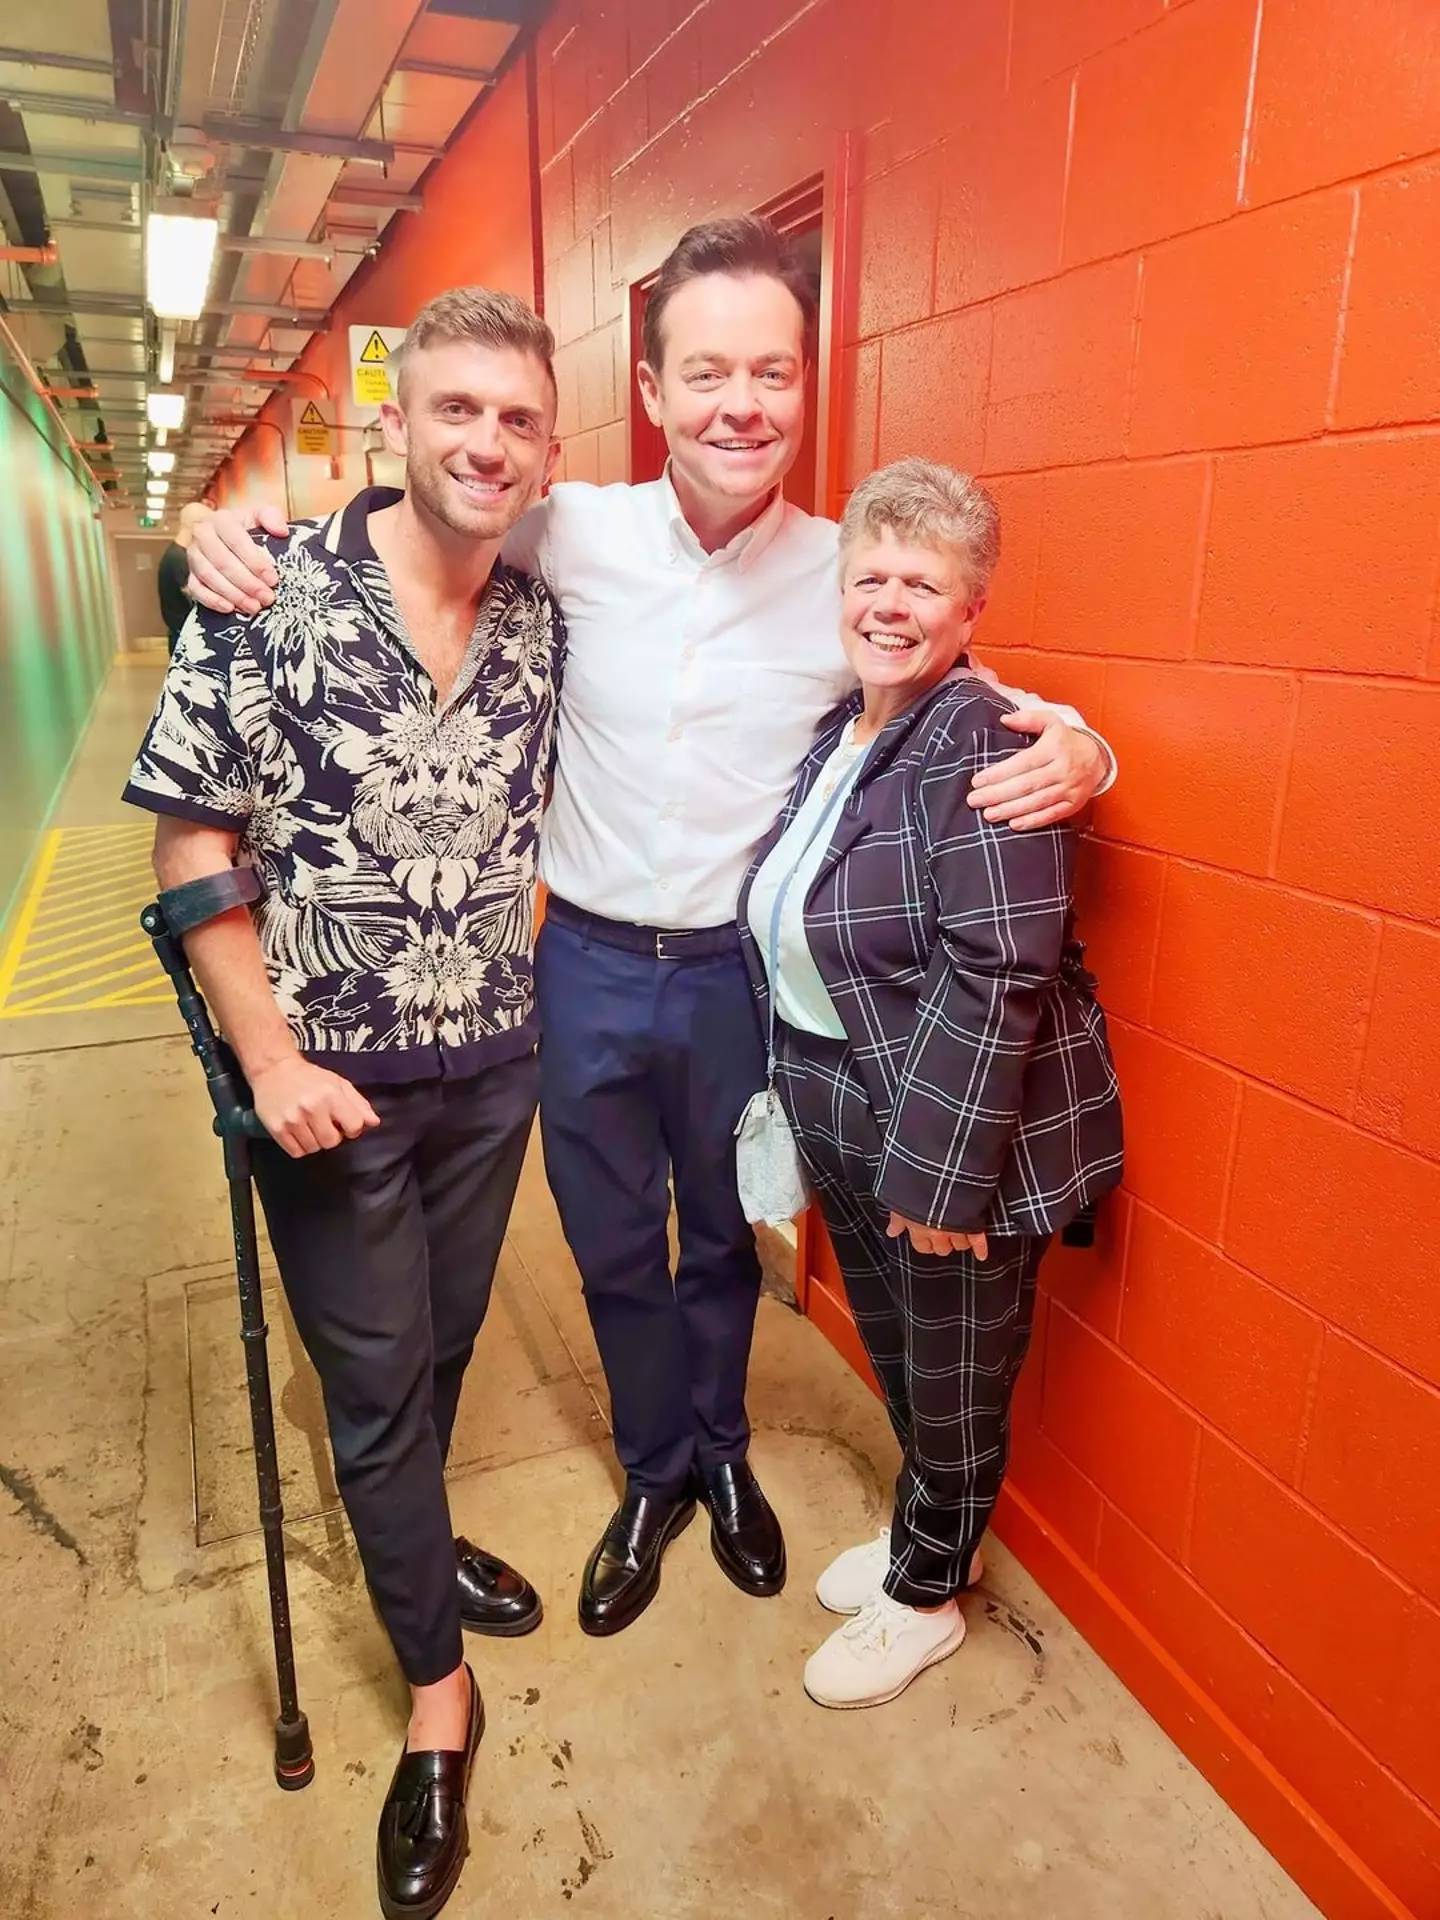 He shared a behind the scenes snap with Stephen Mulhern while thanking viewers for their kindness.